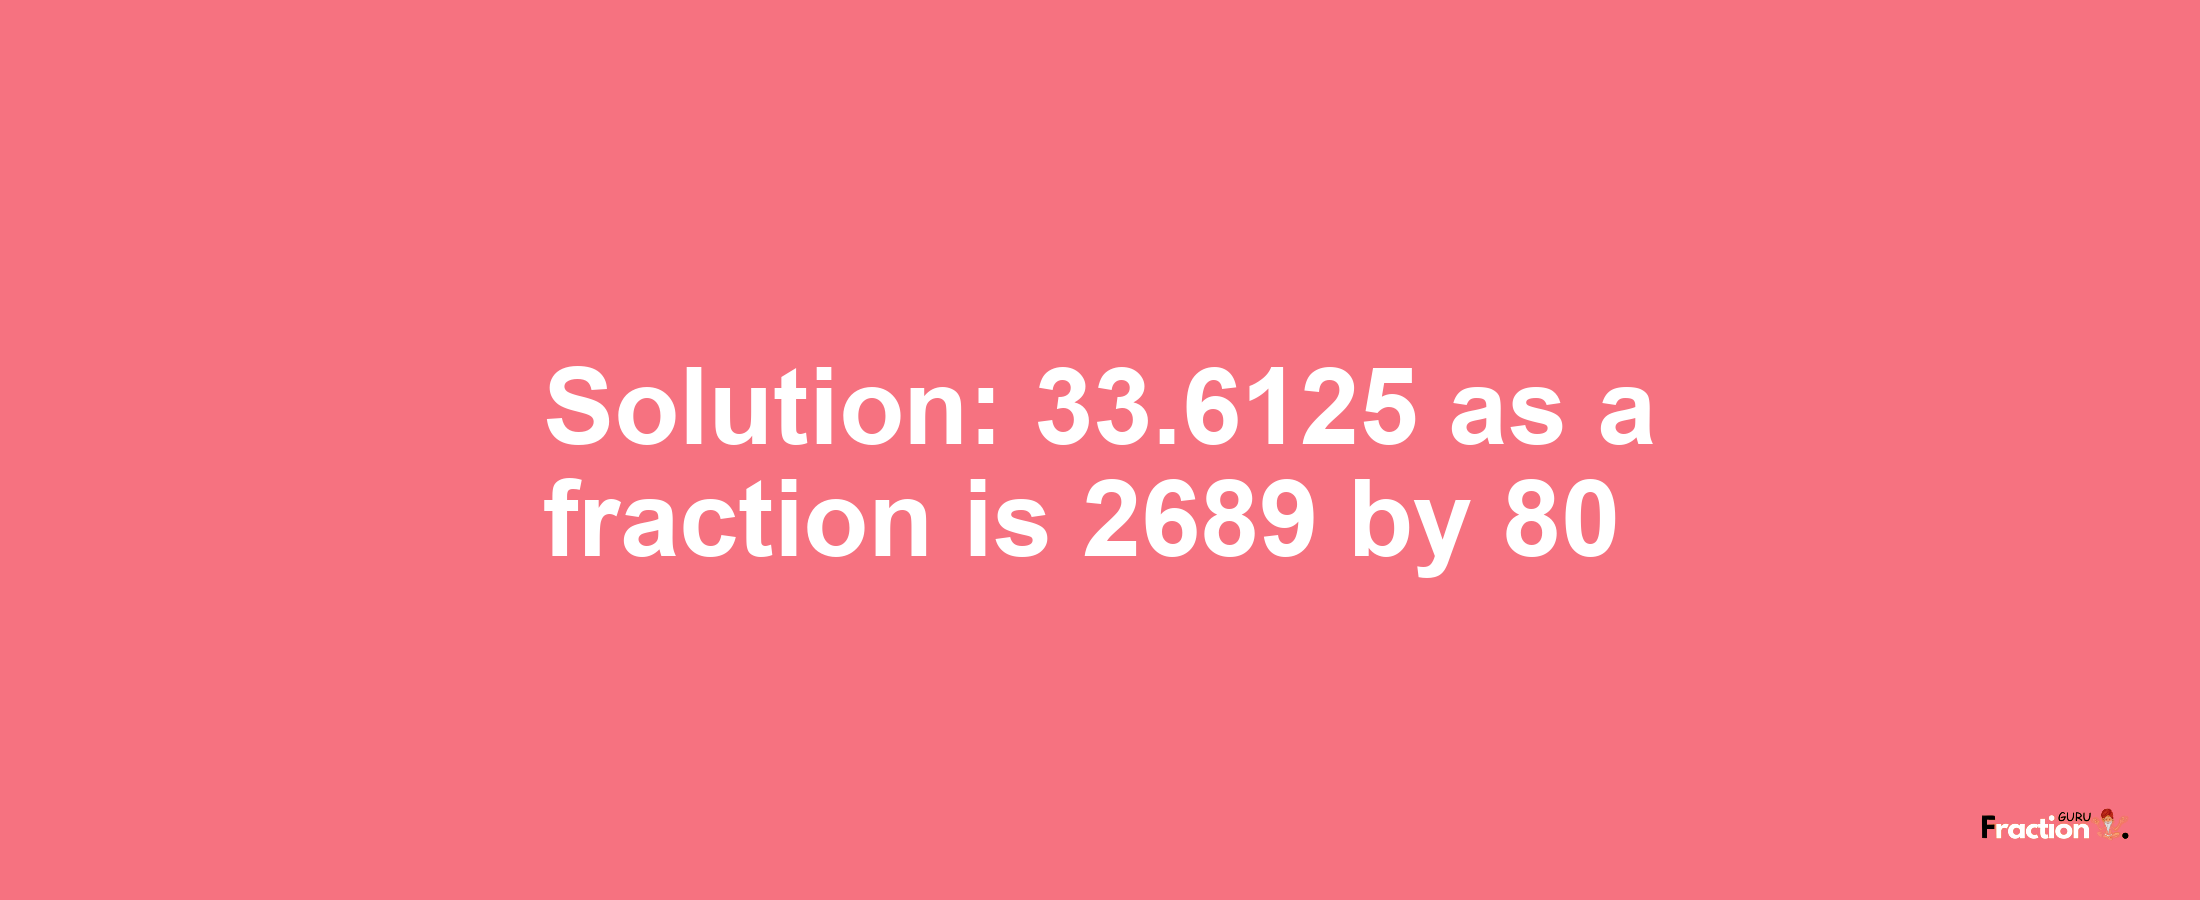 Solution:33.6125 as a fraction is 2689/80